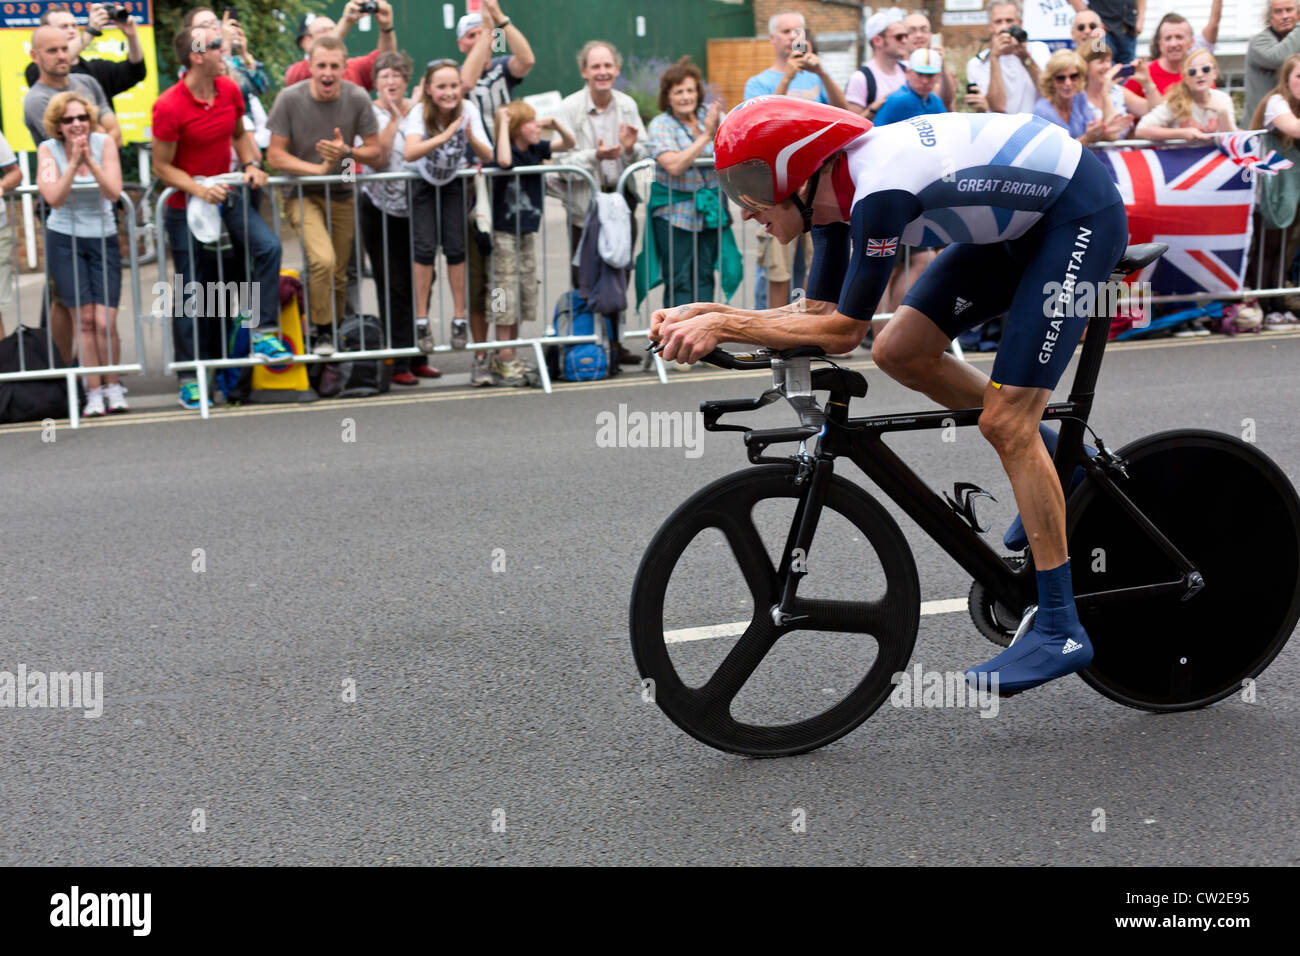 Olympic Mens Cycling Time Trial London 2012. Bradley Wiggins passes crowds in Hampton Wick on his way to winning the Gold Medal. Stock Photo